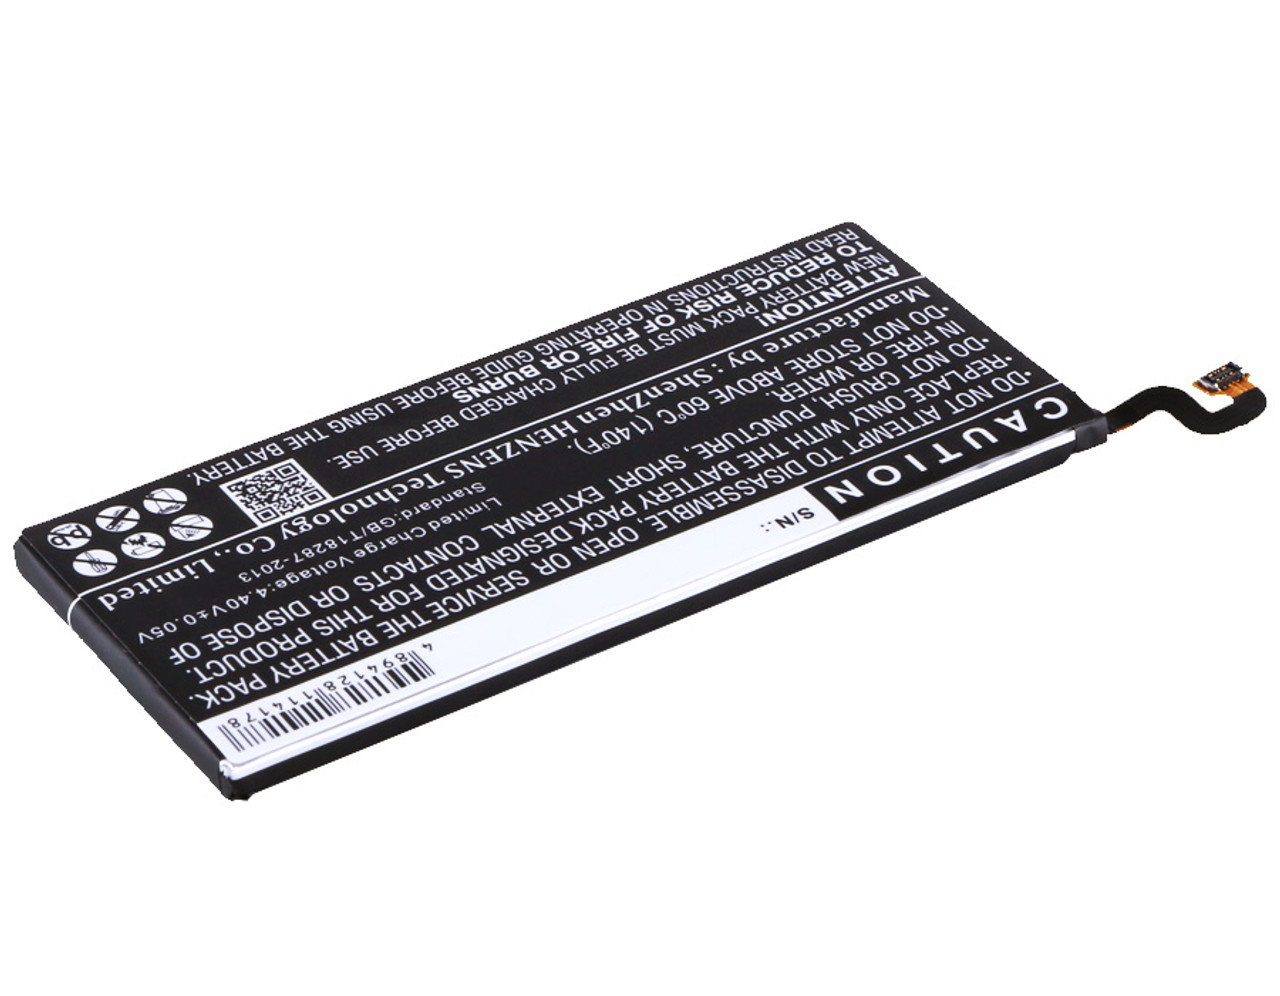 Samsung Galaxy S7 Edge Battery for Cellular Phone